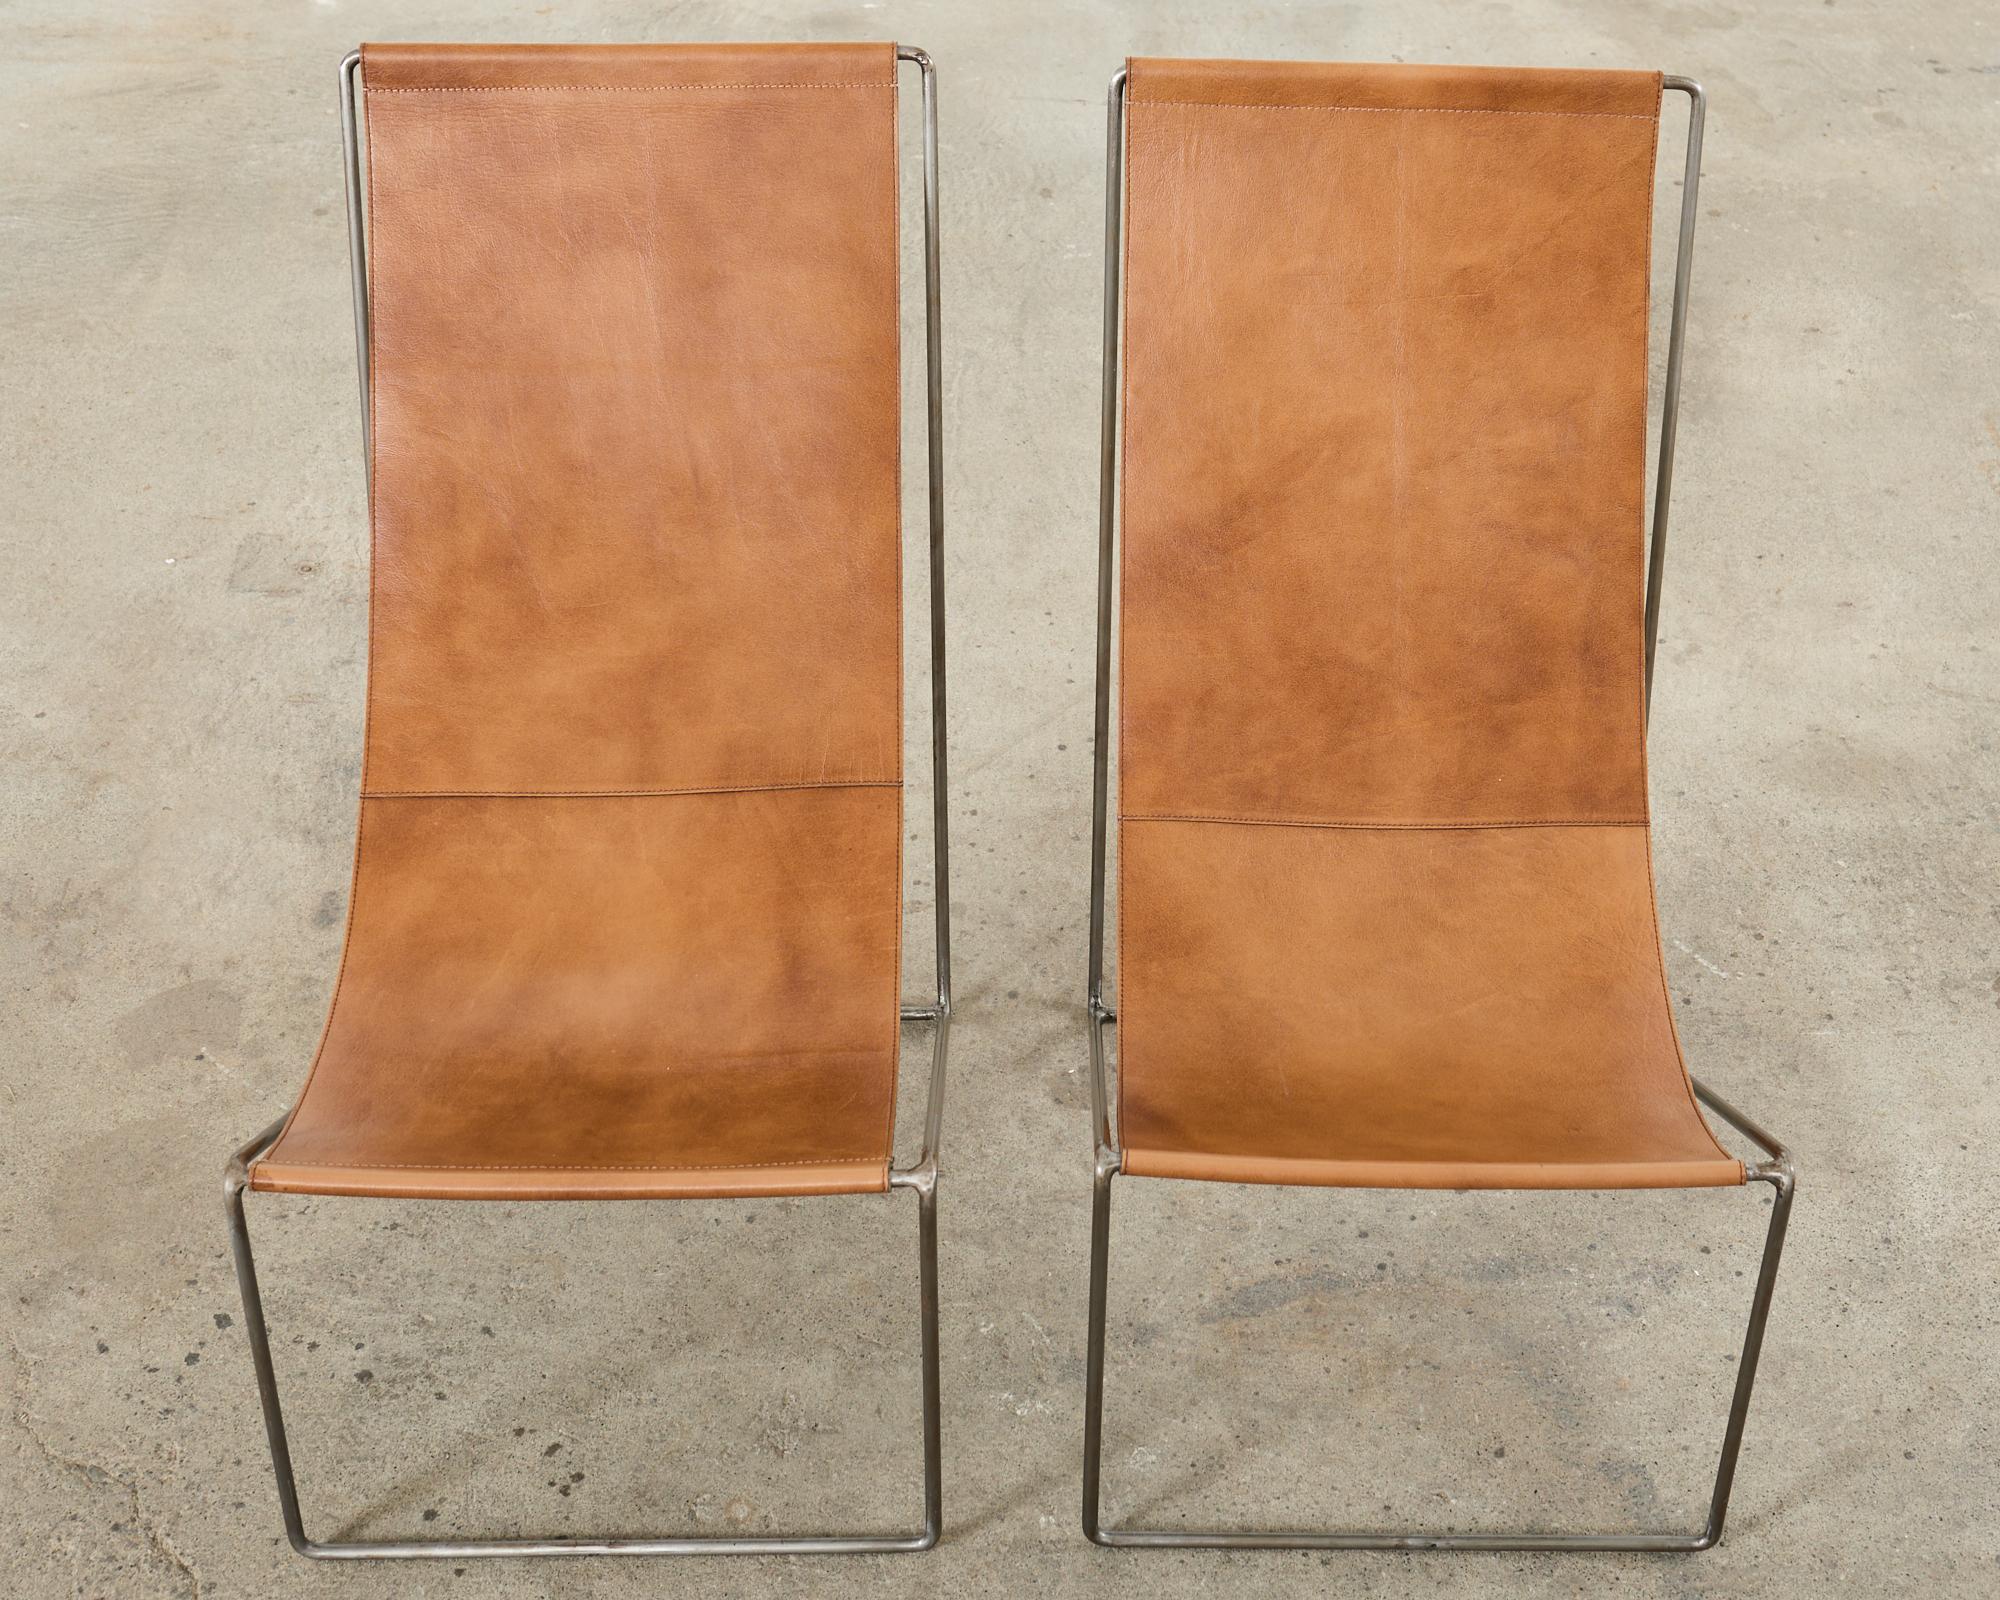 Contemporary Pair of Verner Panton Style Leather Sling Lounge Chairs For Sale